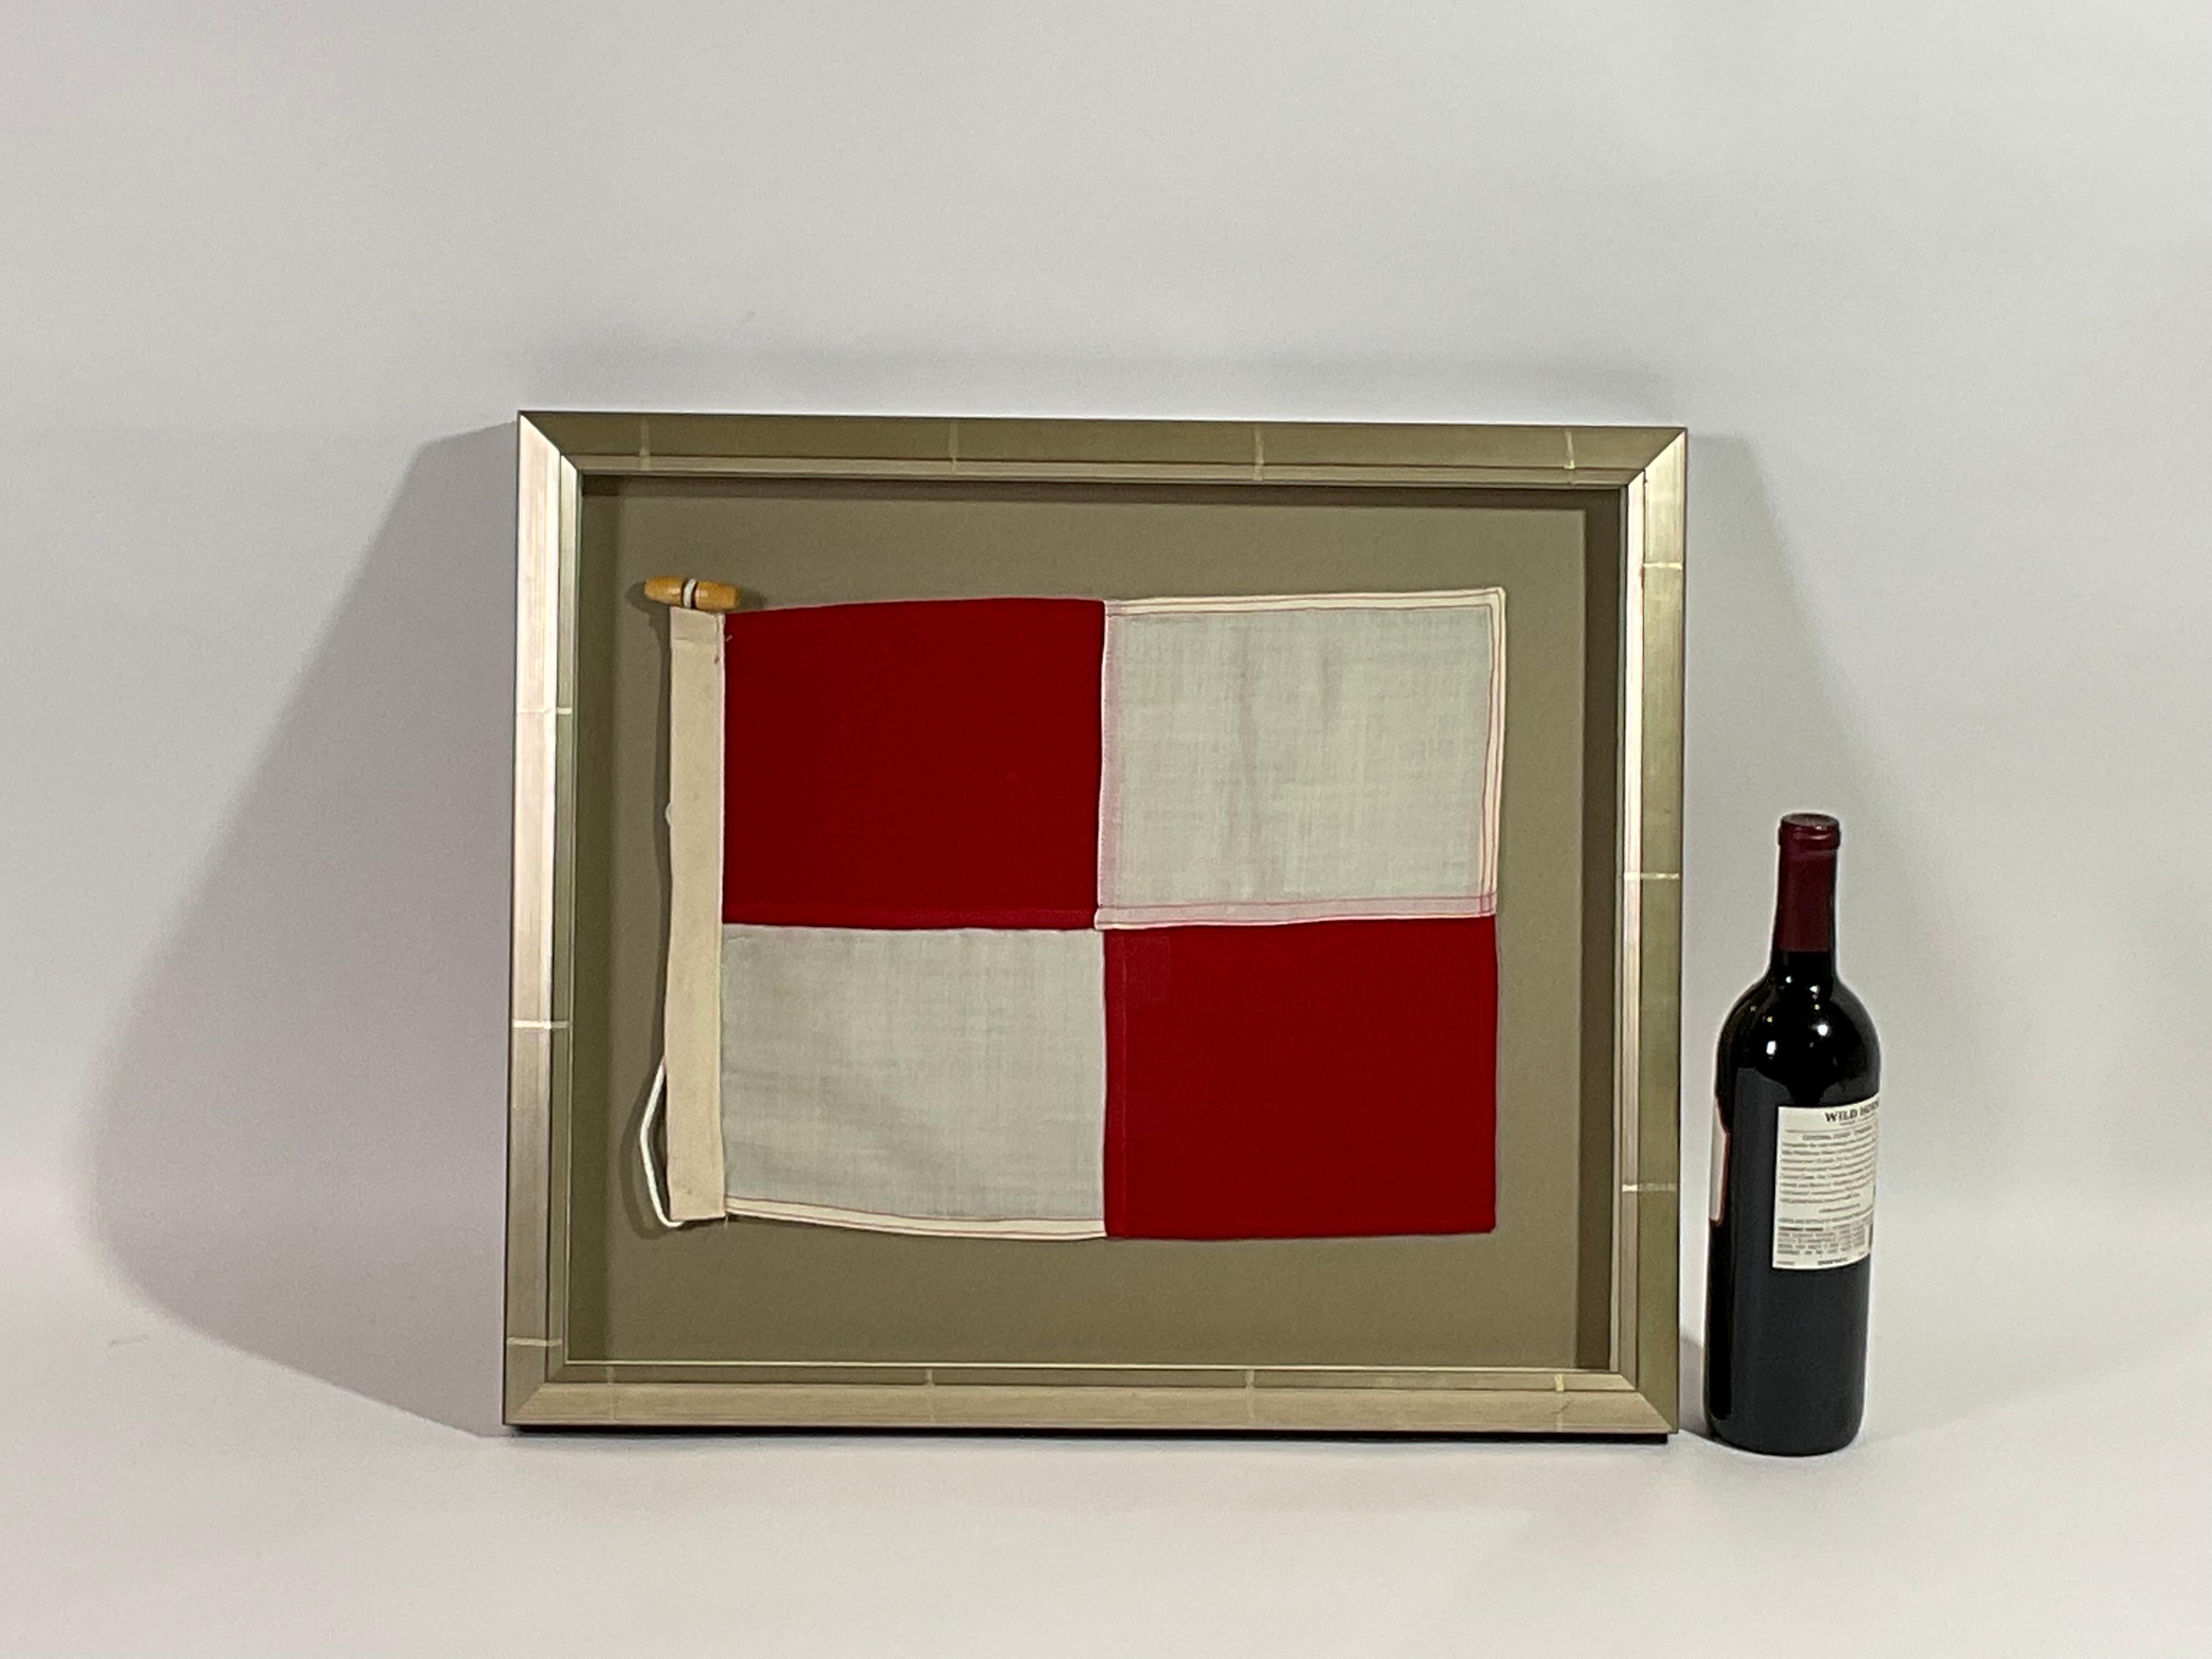 Framed maritime signal flag representing the letter “U” in the international code of signals. This authentic pennant is made of individual panels of red and white cotton. Fitted to a heavy canvas hoist band with original rope and toggle. This